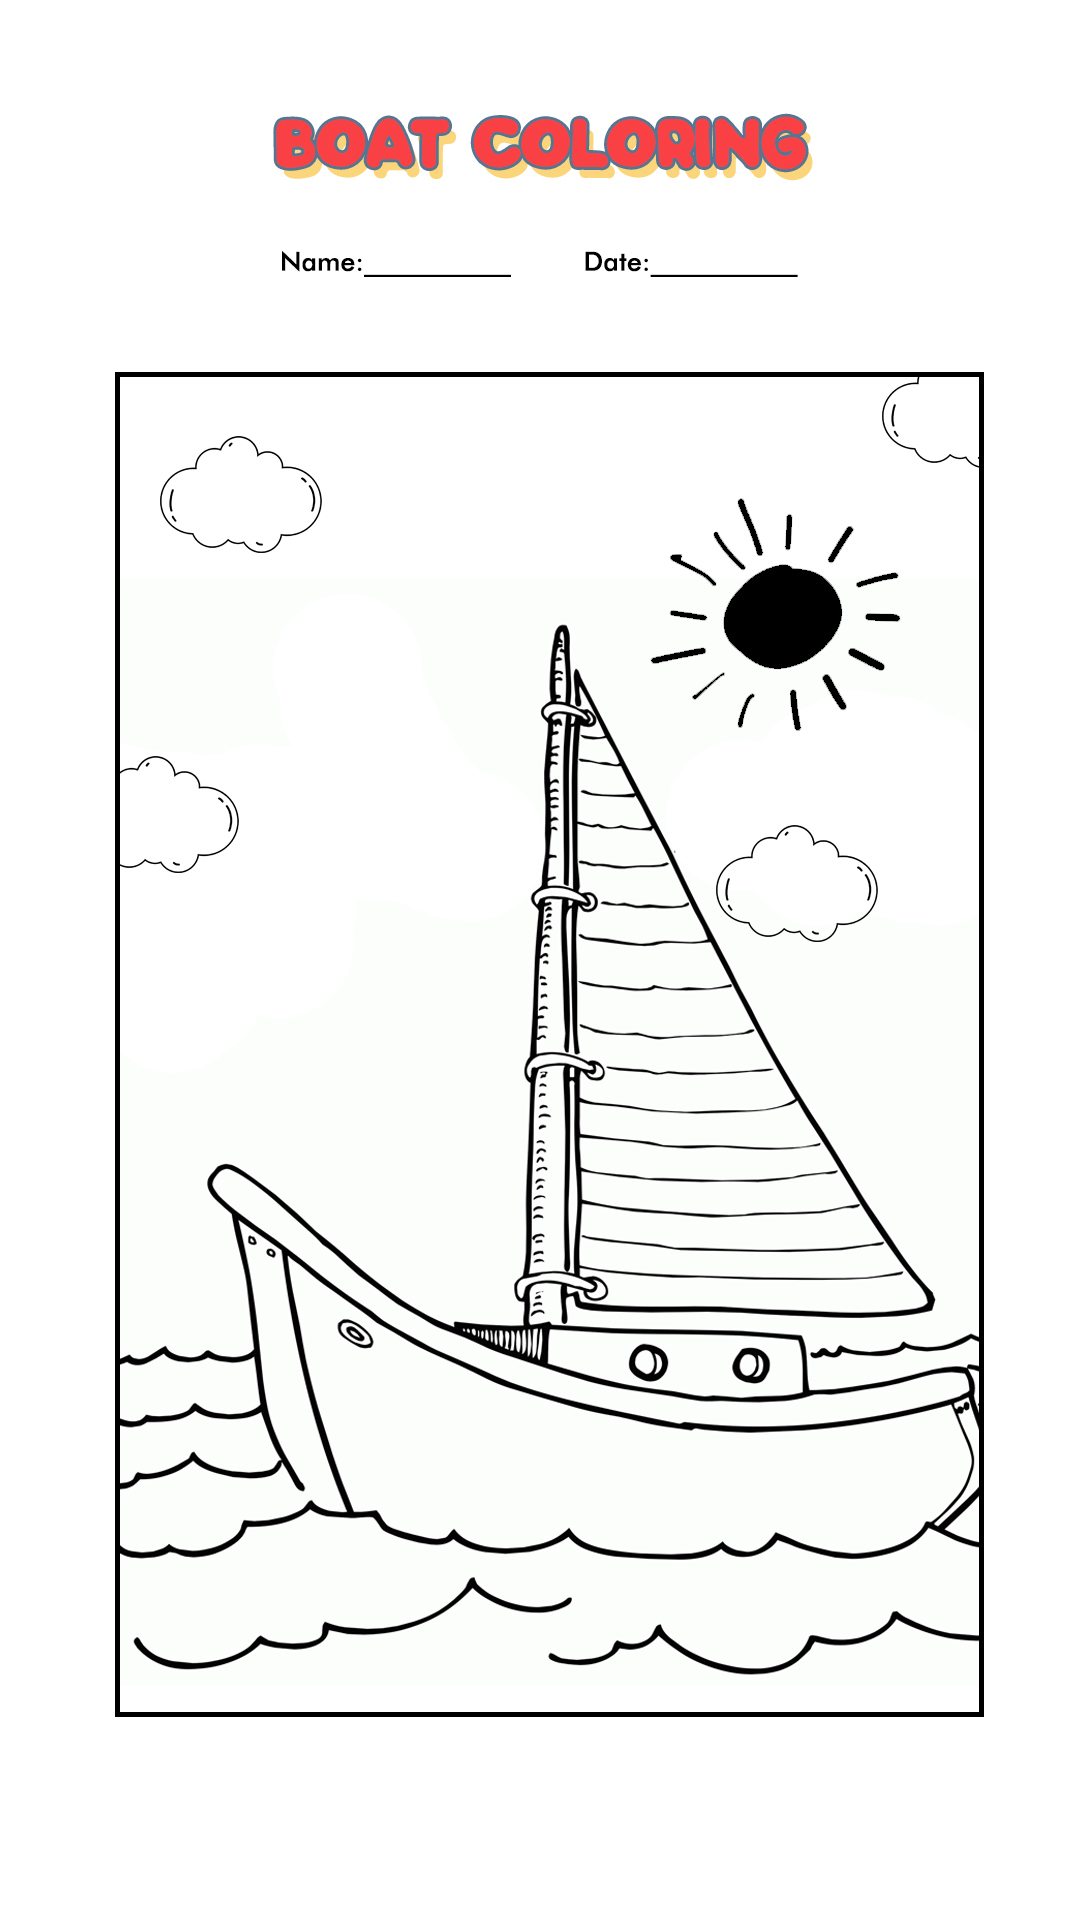 Printable Boat Coloring Pages Image